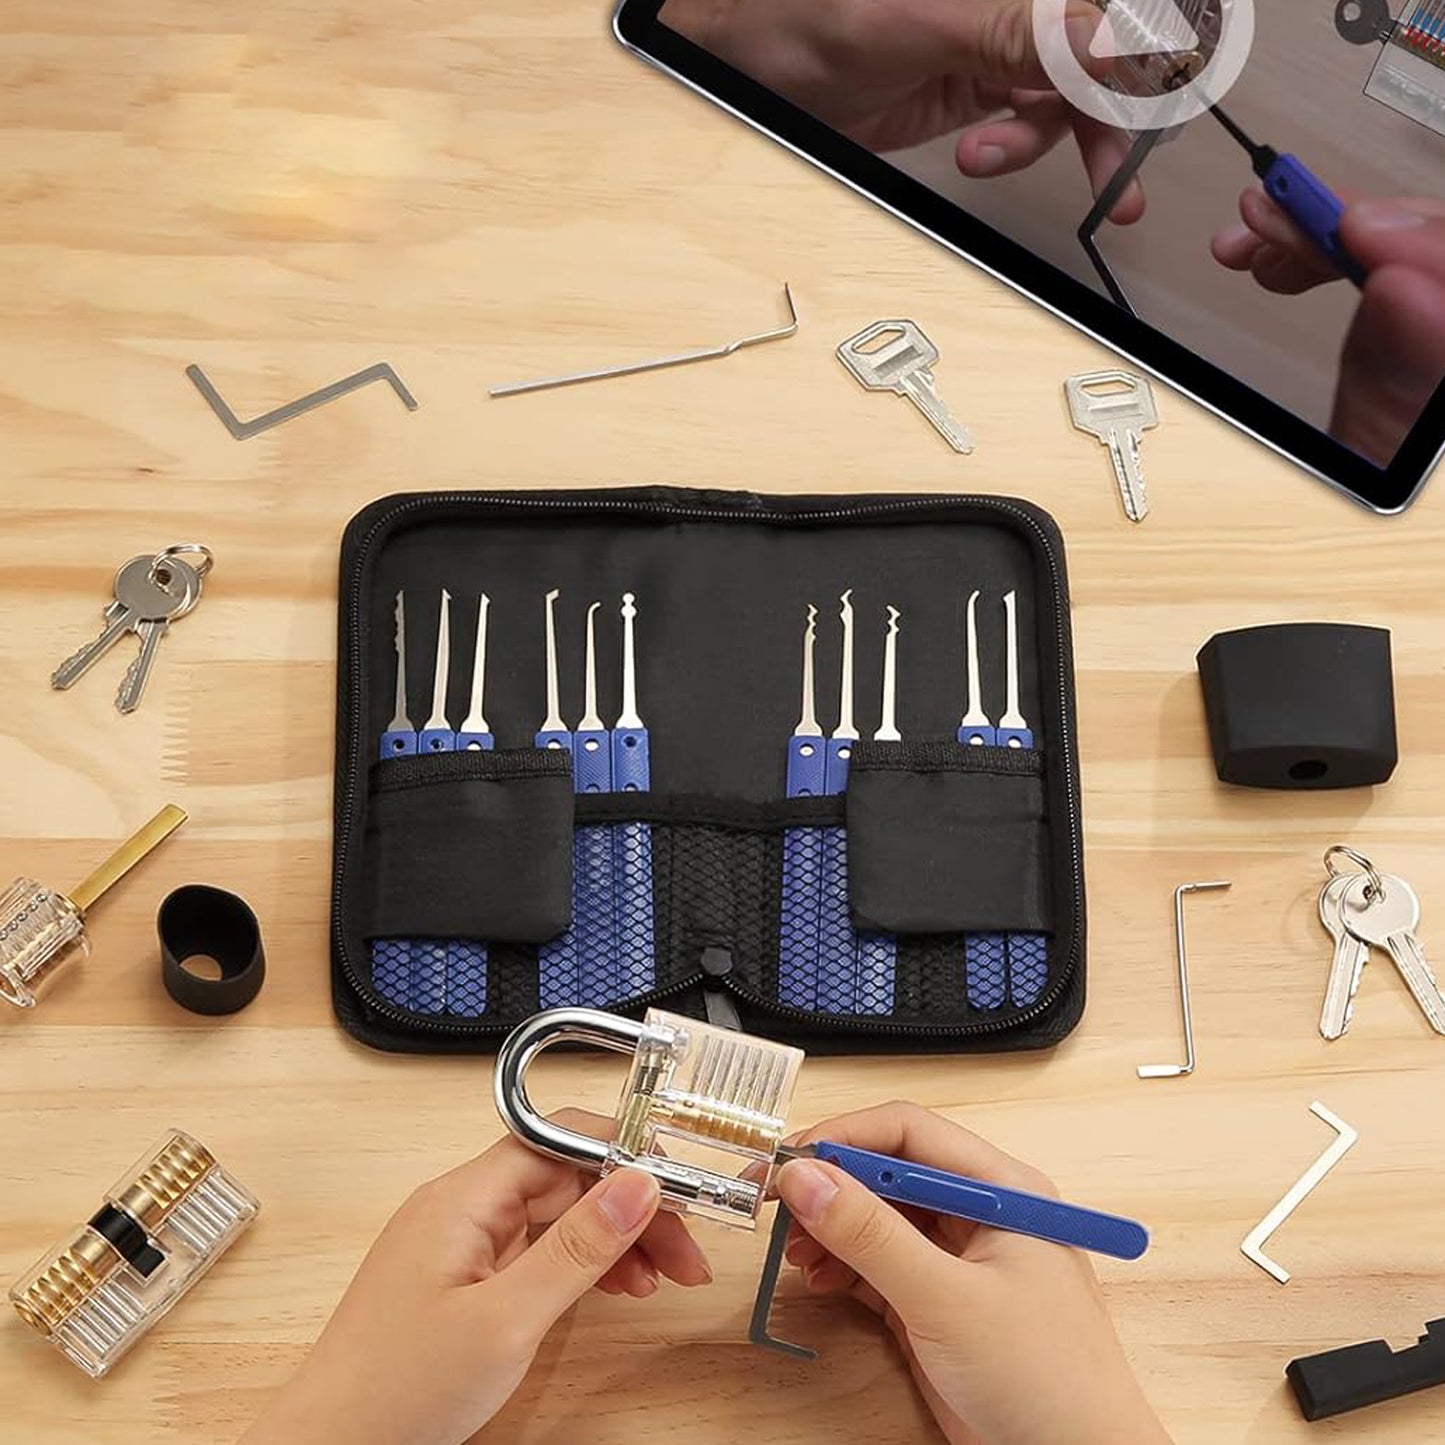 Practice Lock Picking Tools with 4 Transparent Training Padlock, Guide for Beginner and Locksmith Training